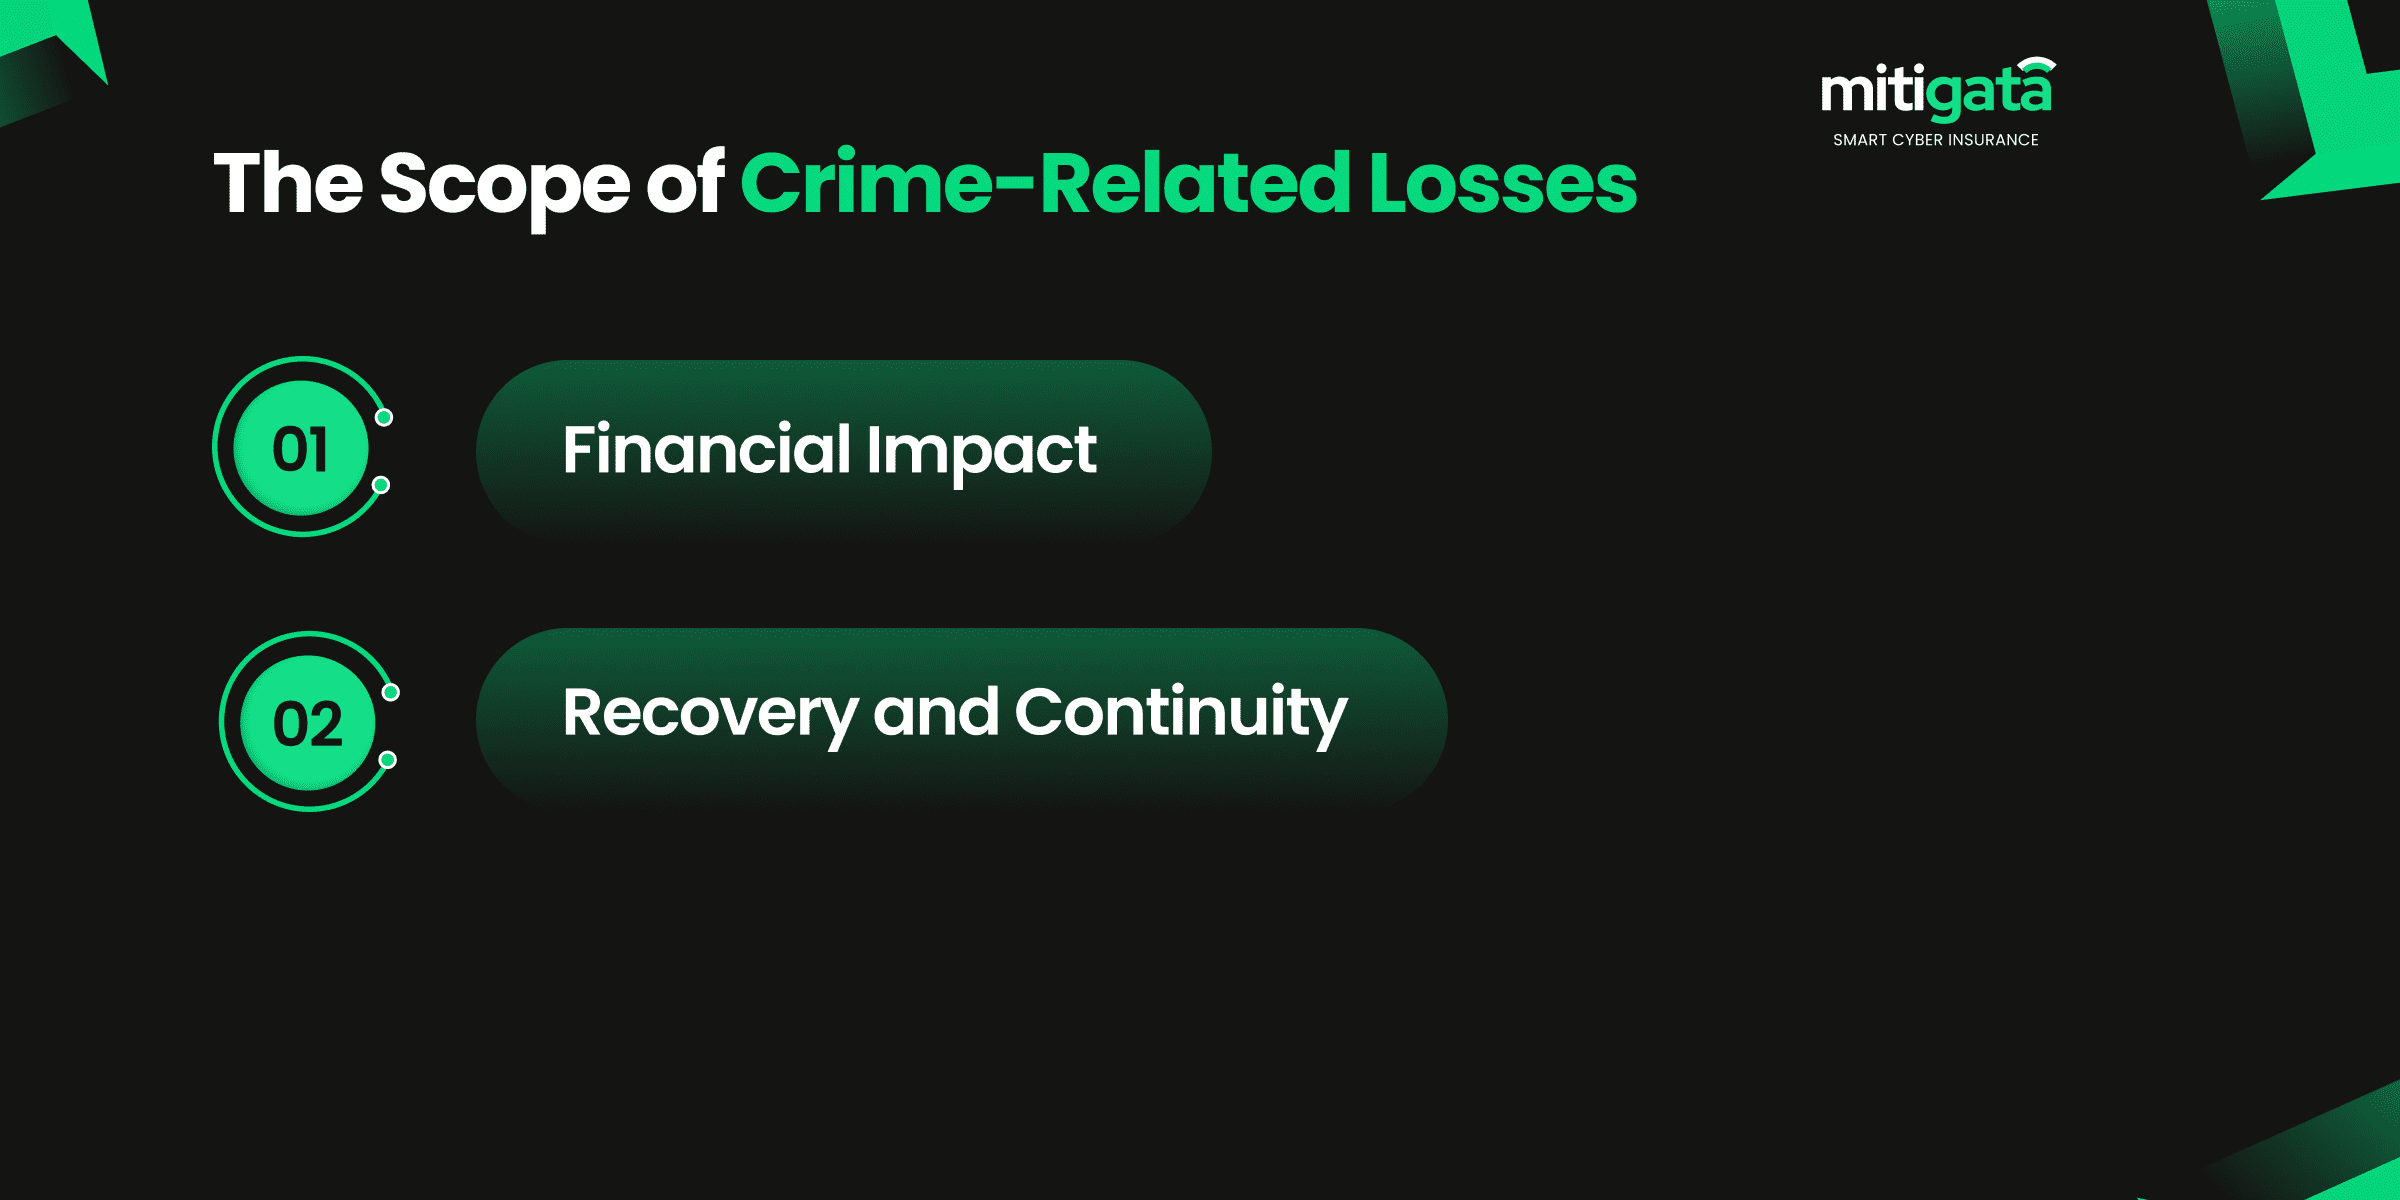 The Scope of Crime-Related Losses